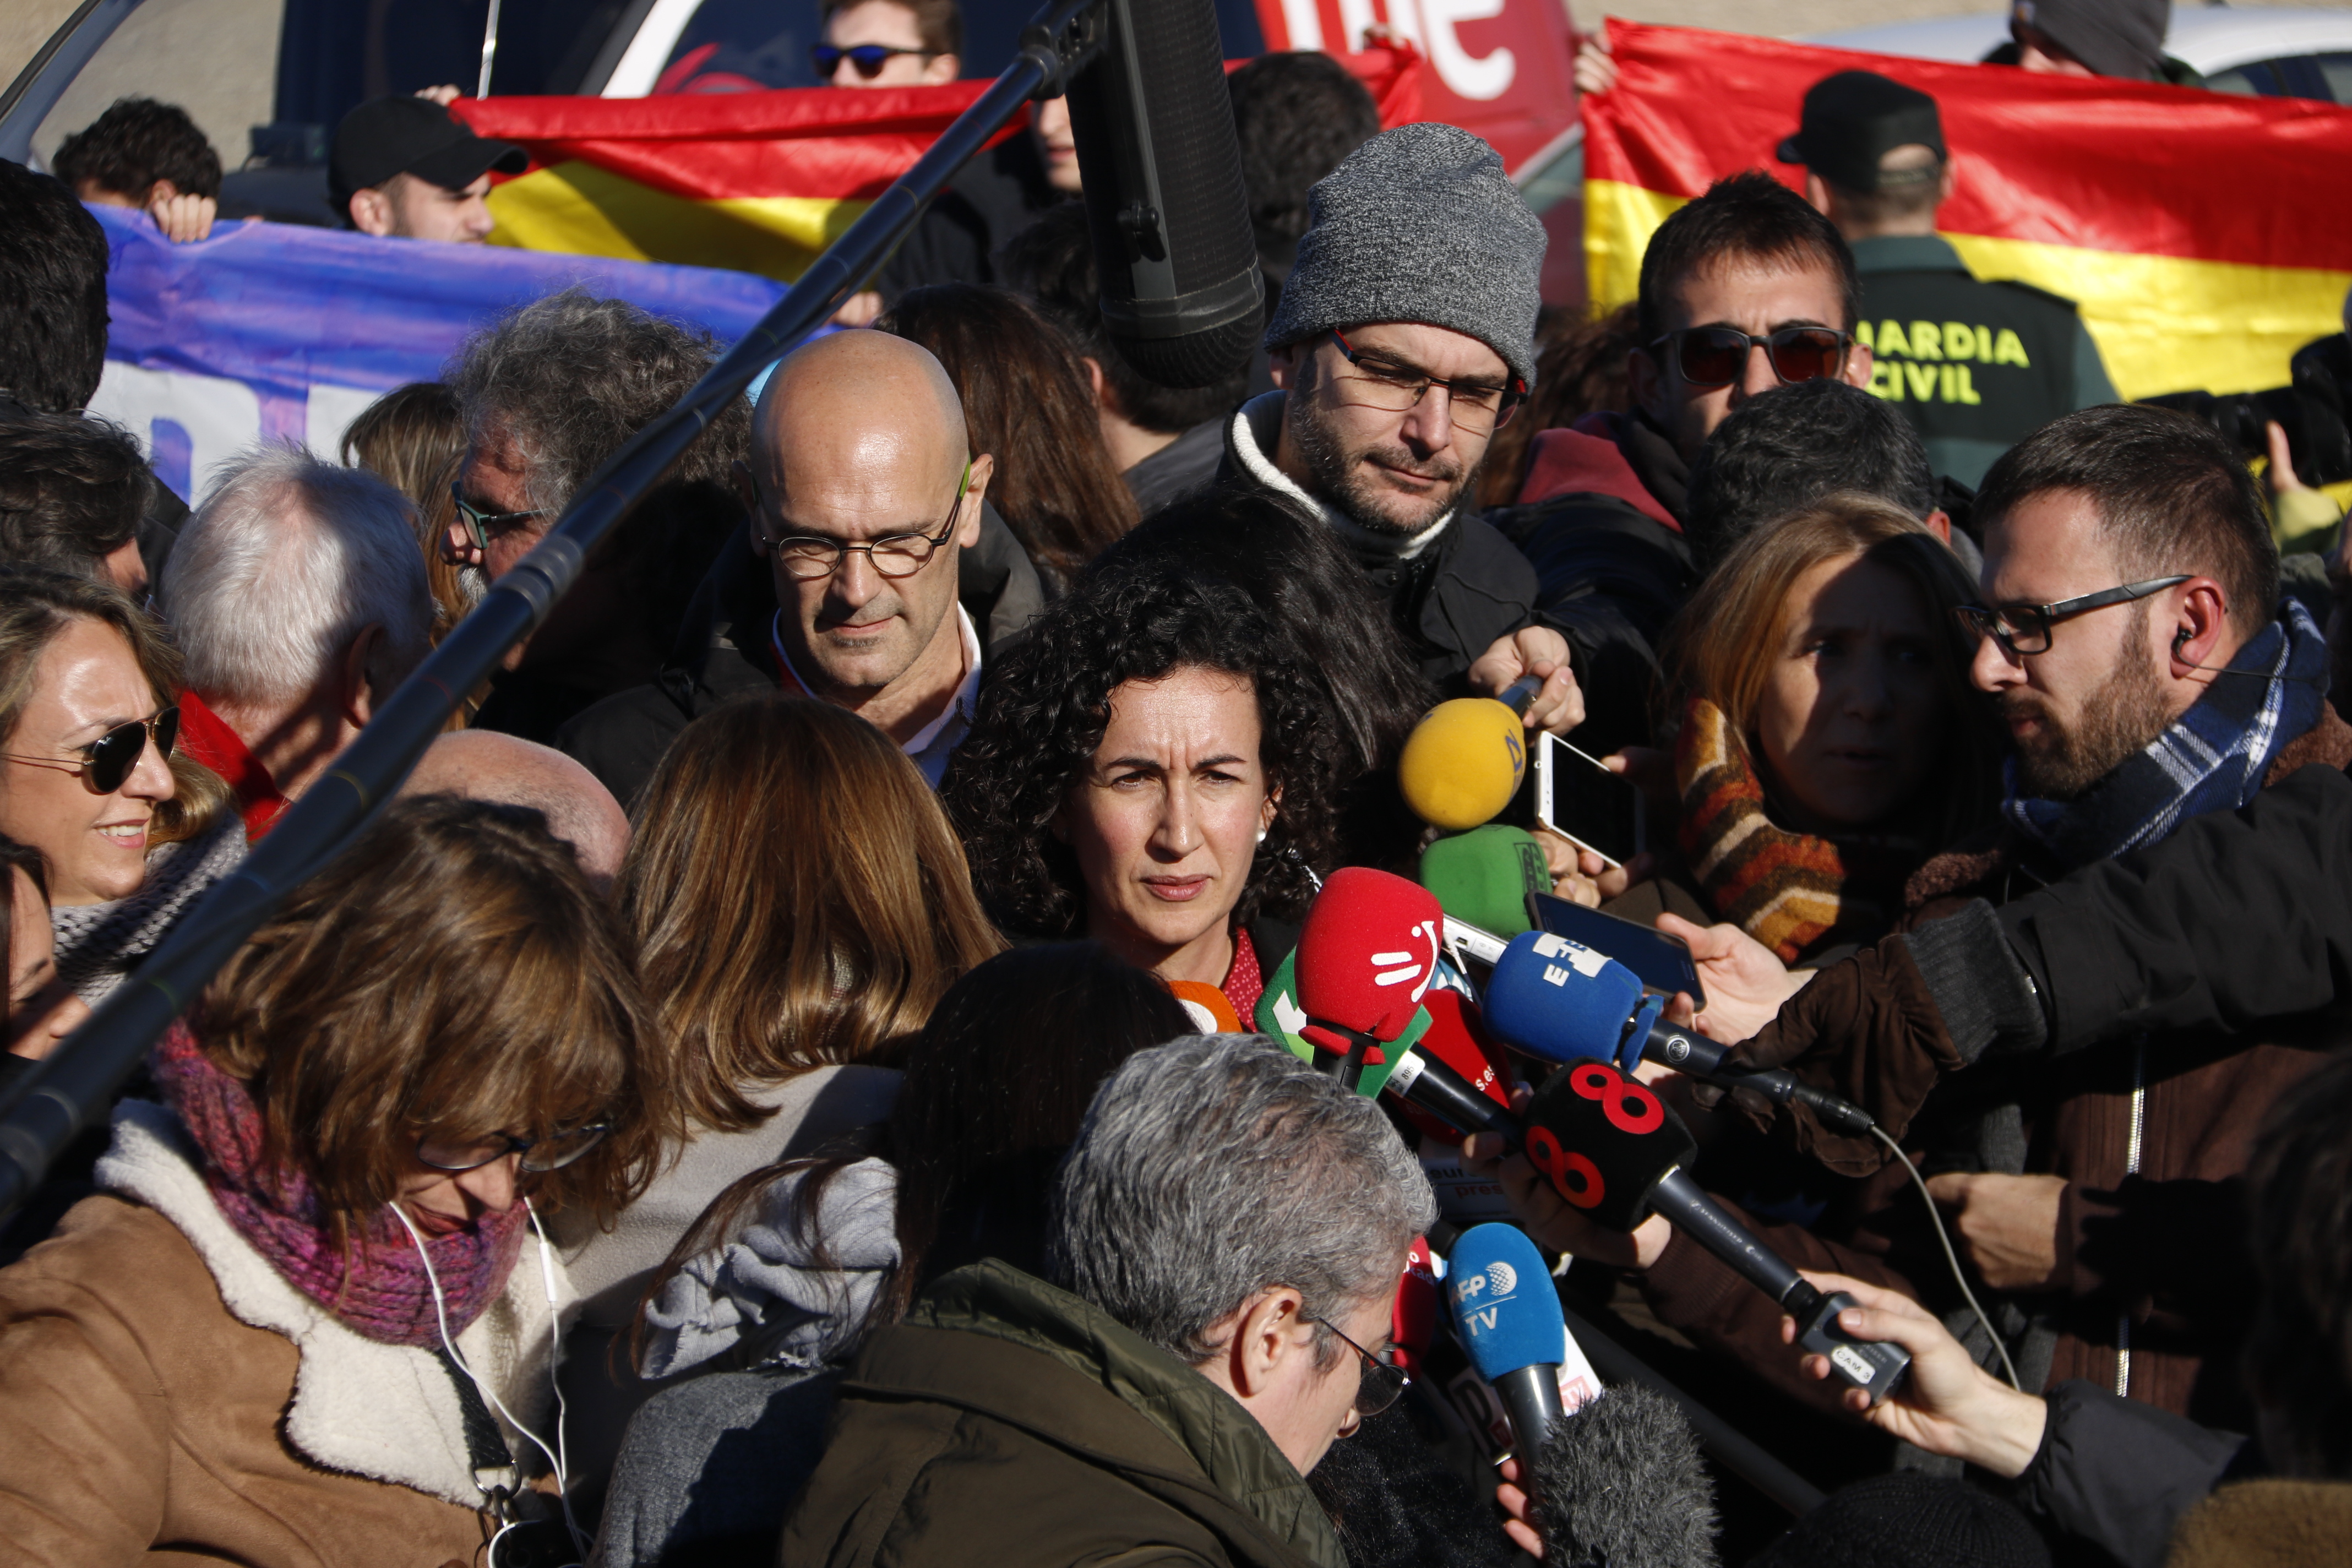 ERC number two candidate, Marta Rovira, giving statements to the press at the Estremera prison, while the far-right xenophobic Hogar Social Madrid group protests behind her (by Rafa Garrido)